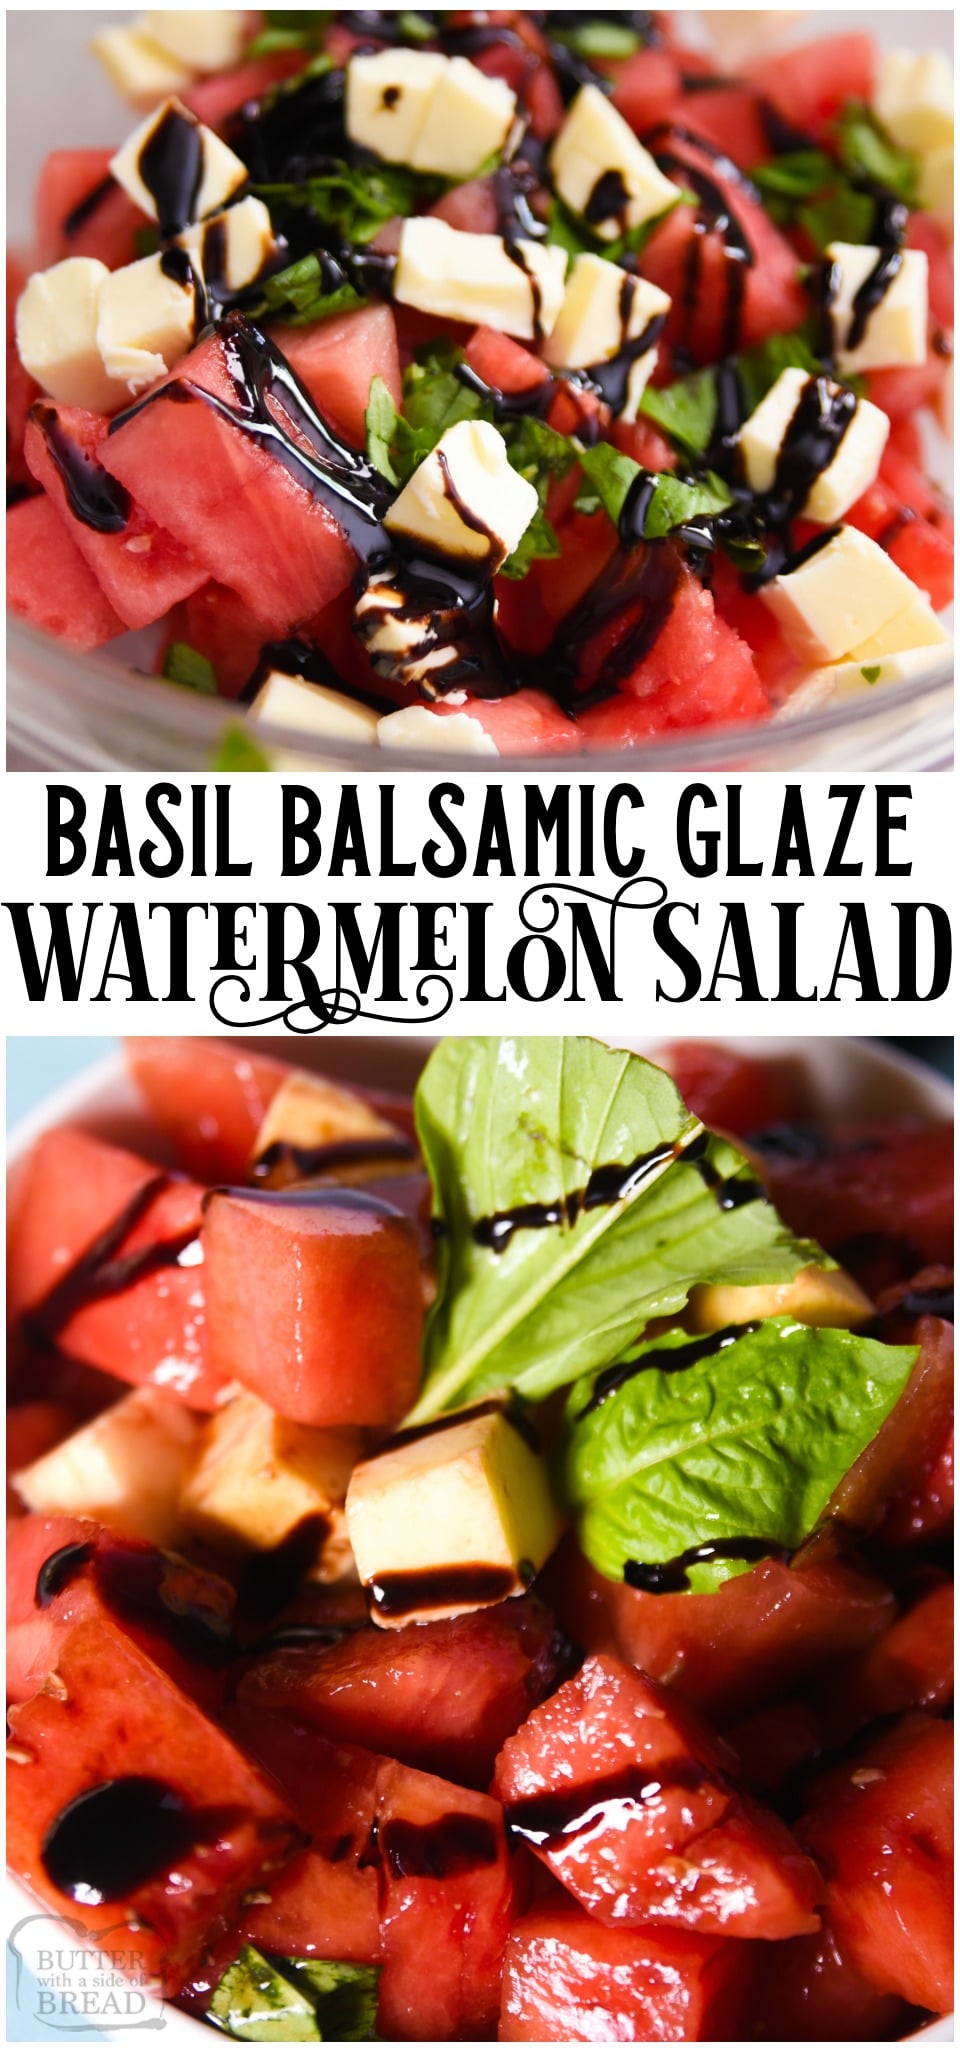 Watermelon Salad recipe with just 4 ingredients! Delightful mix of sweet and savory flavors in this watermelon salad with basil and balsamic vinegar!